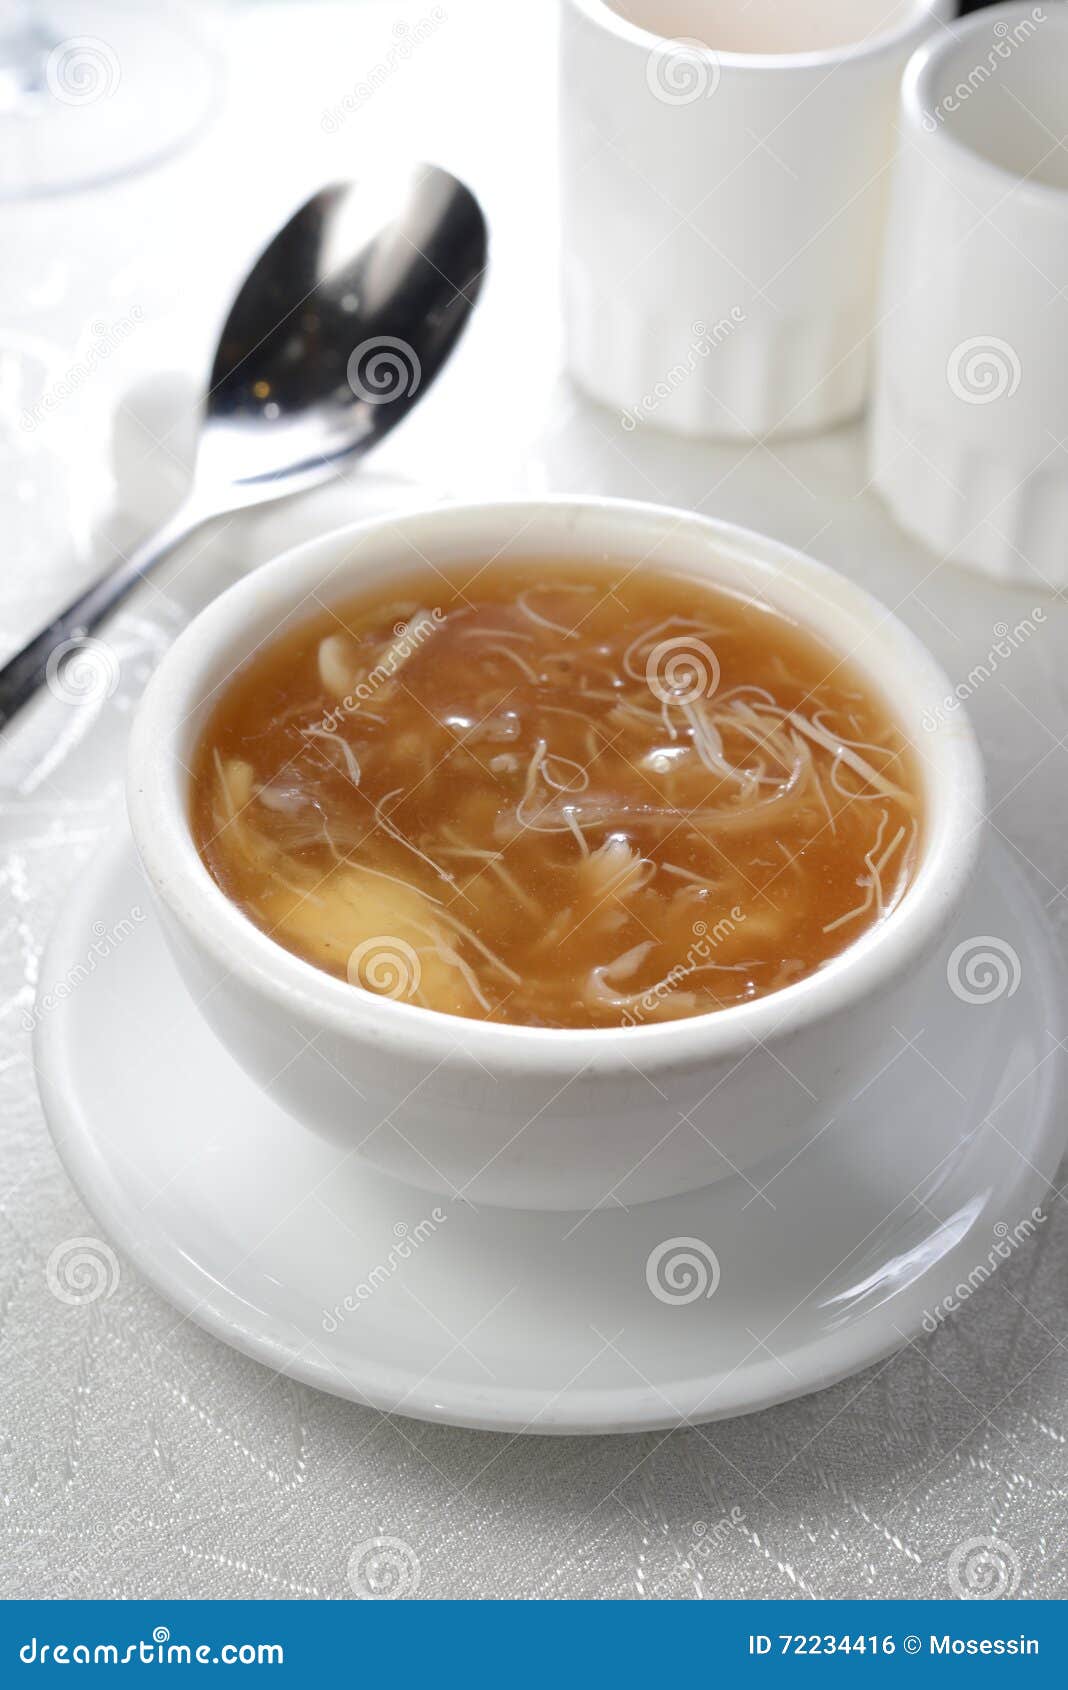 Shark fin soup stock photo. Image of swallows, chinese - 72234416